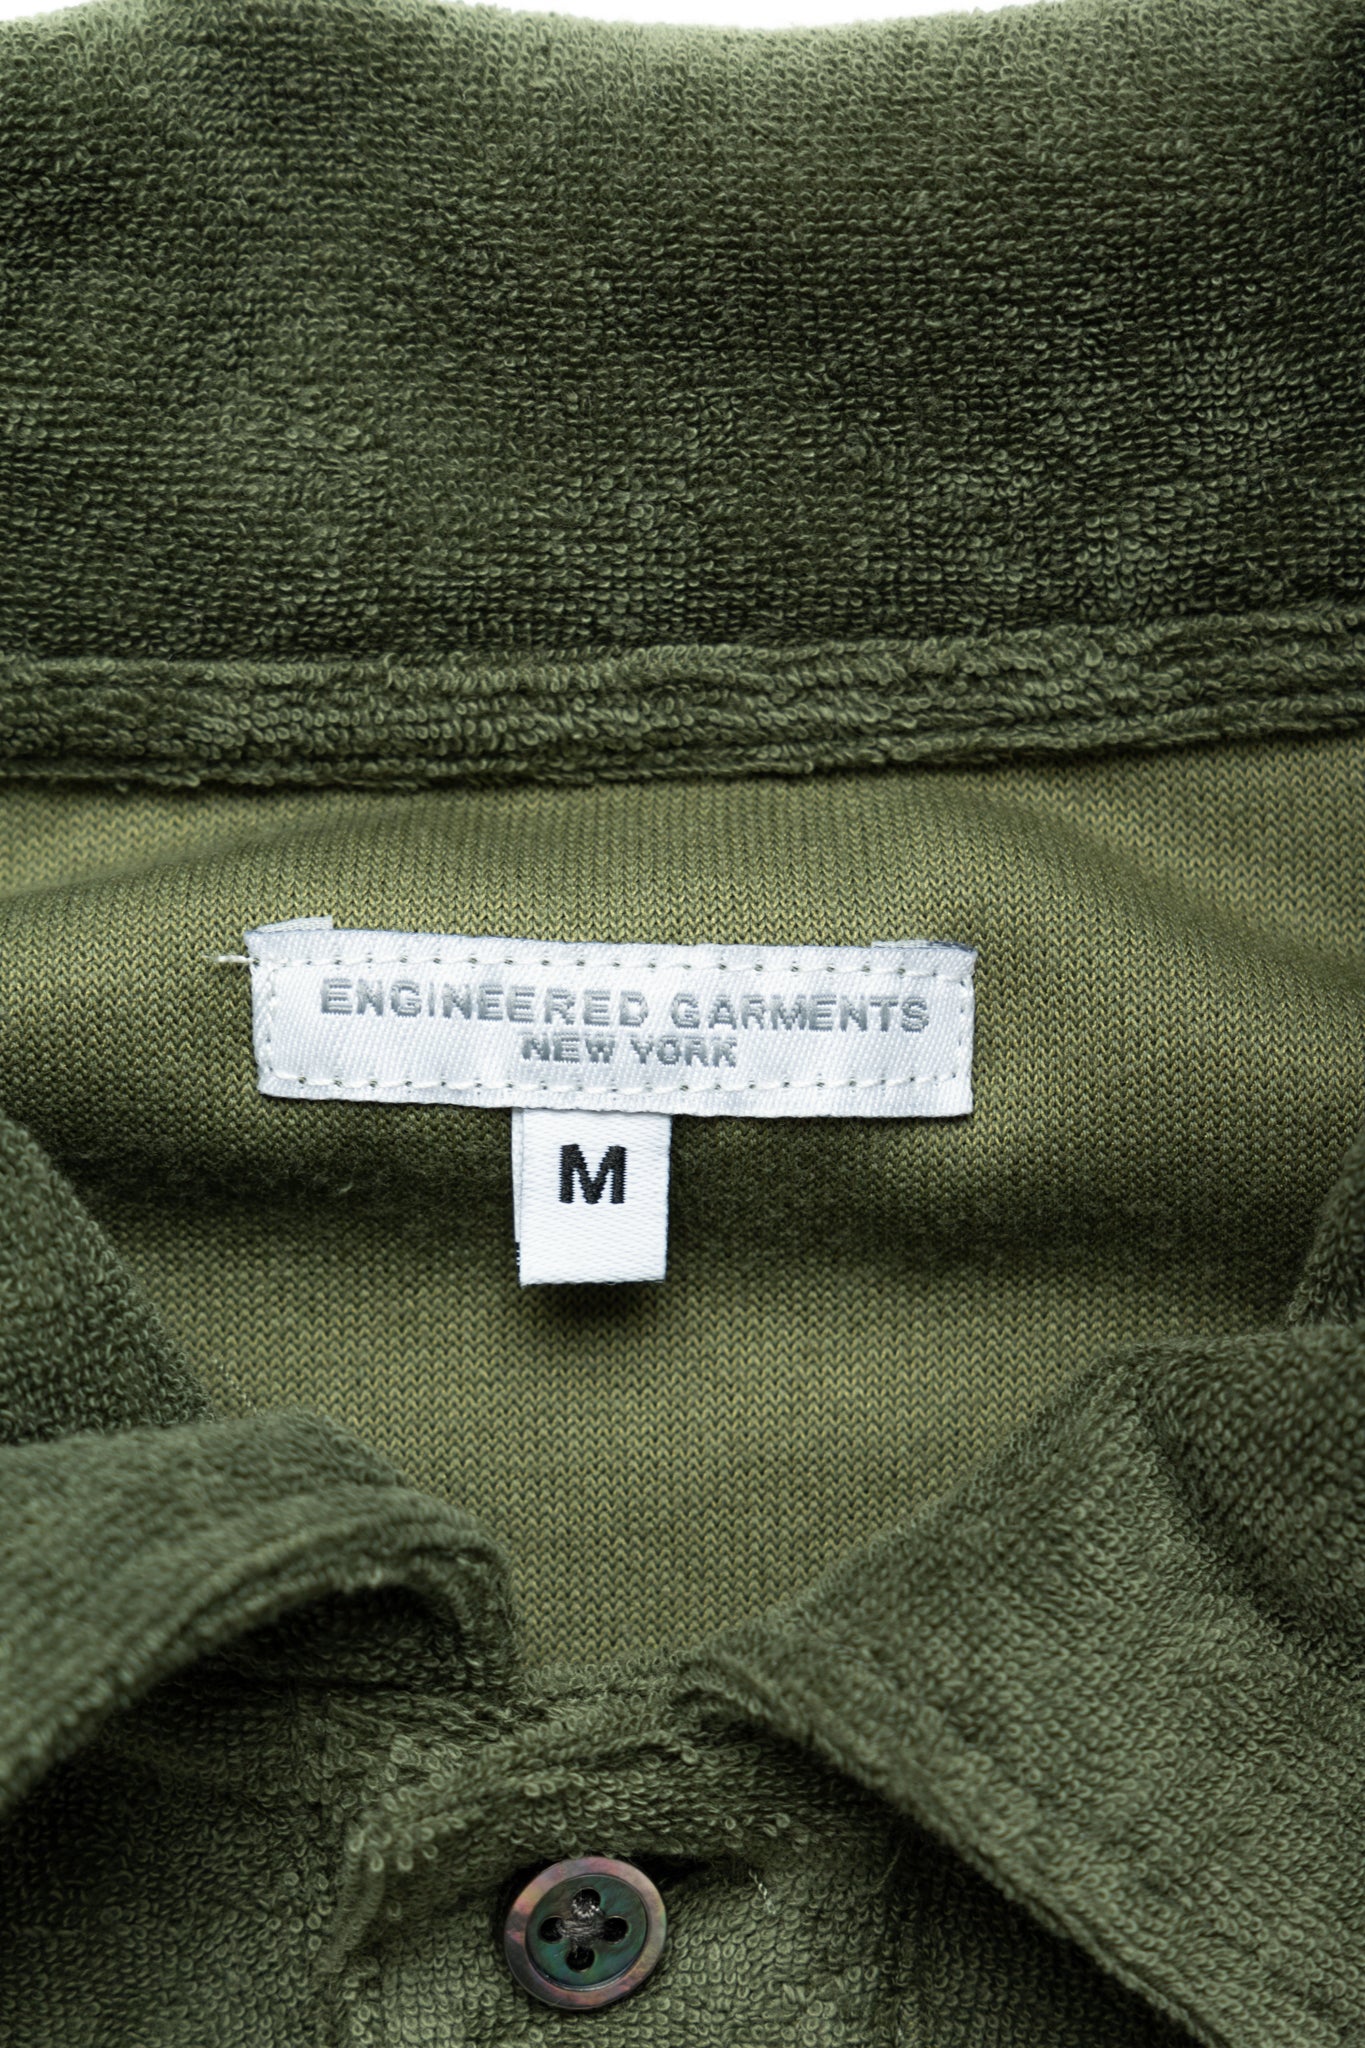 Polo Shirt CP Velour - Olive